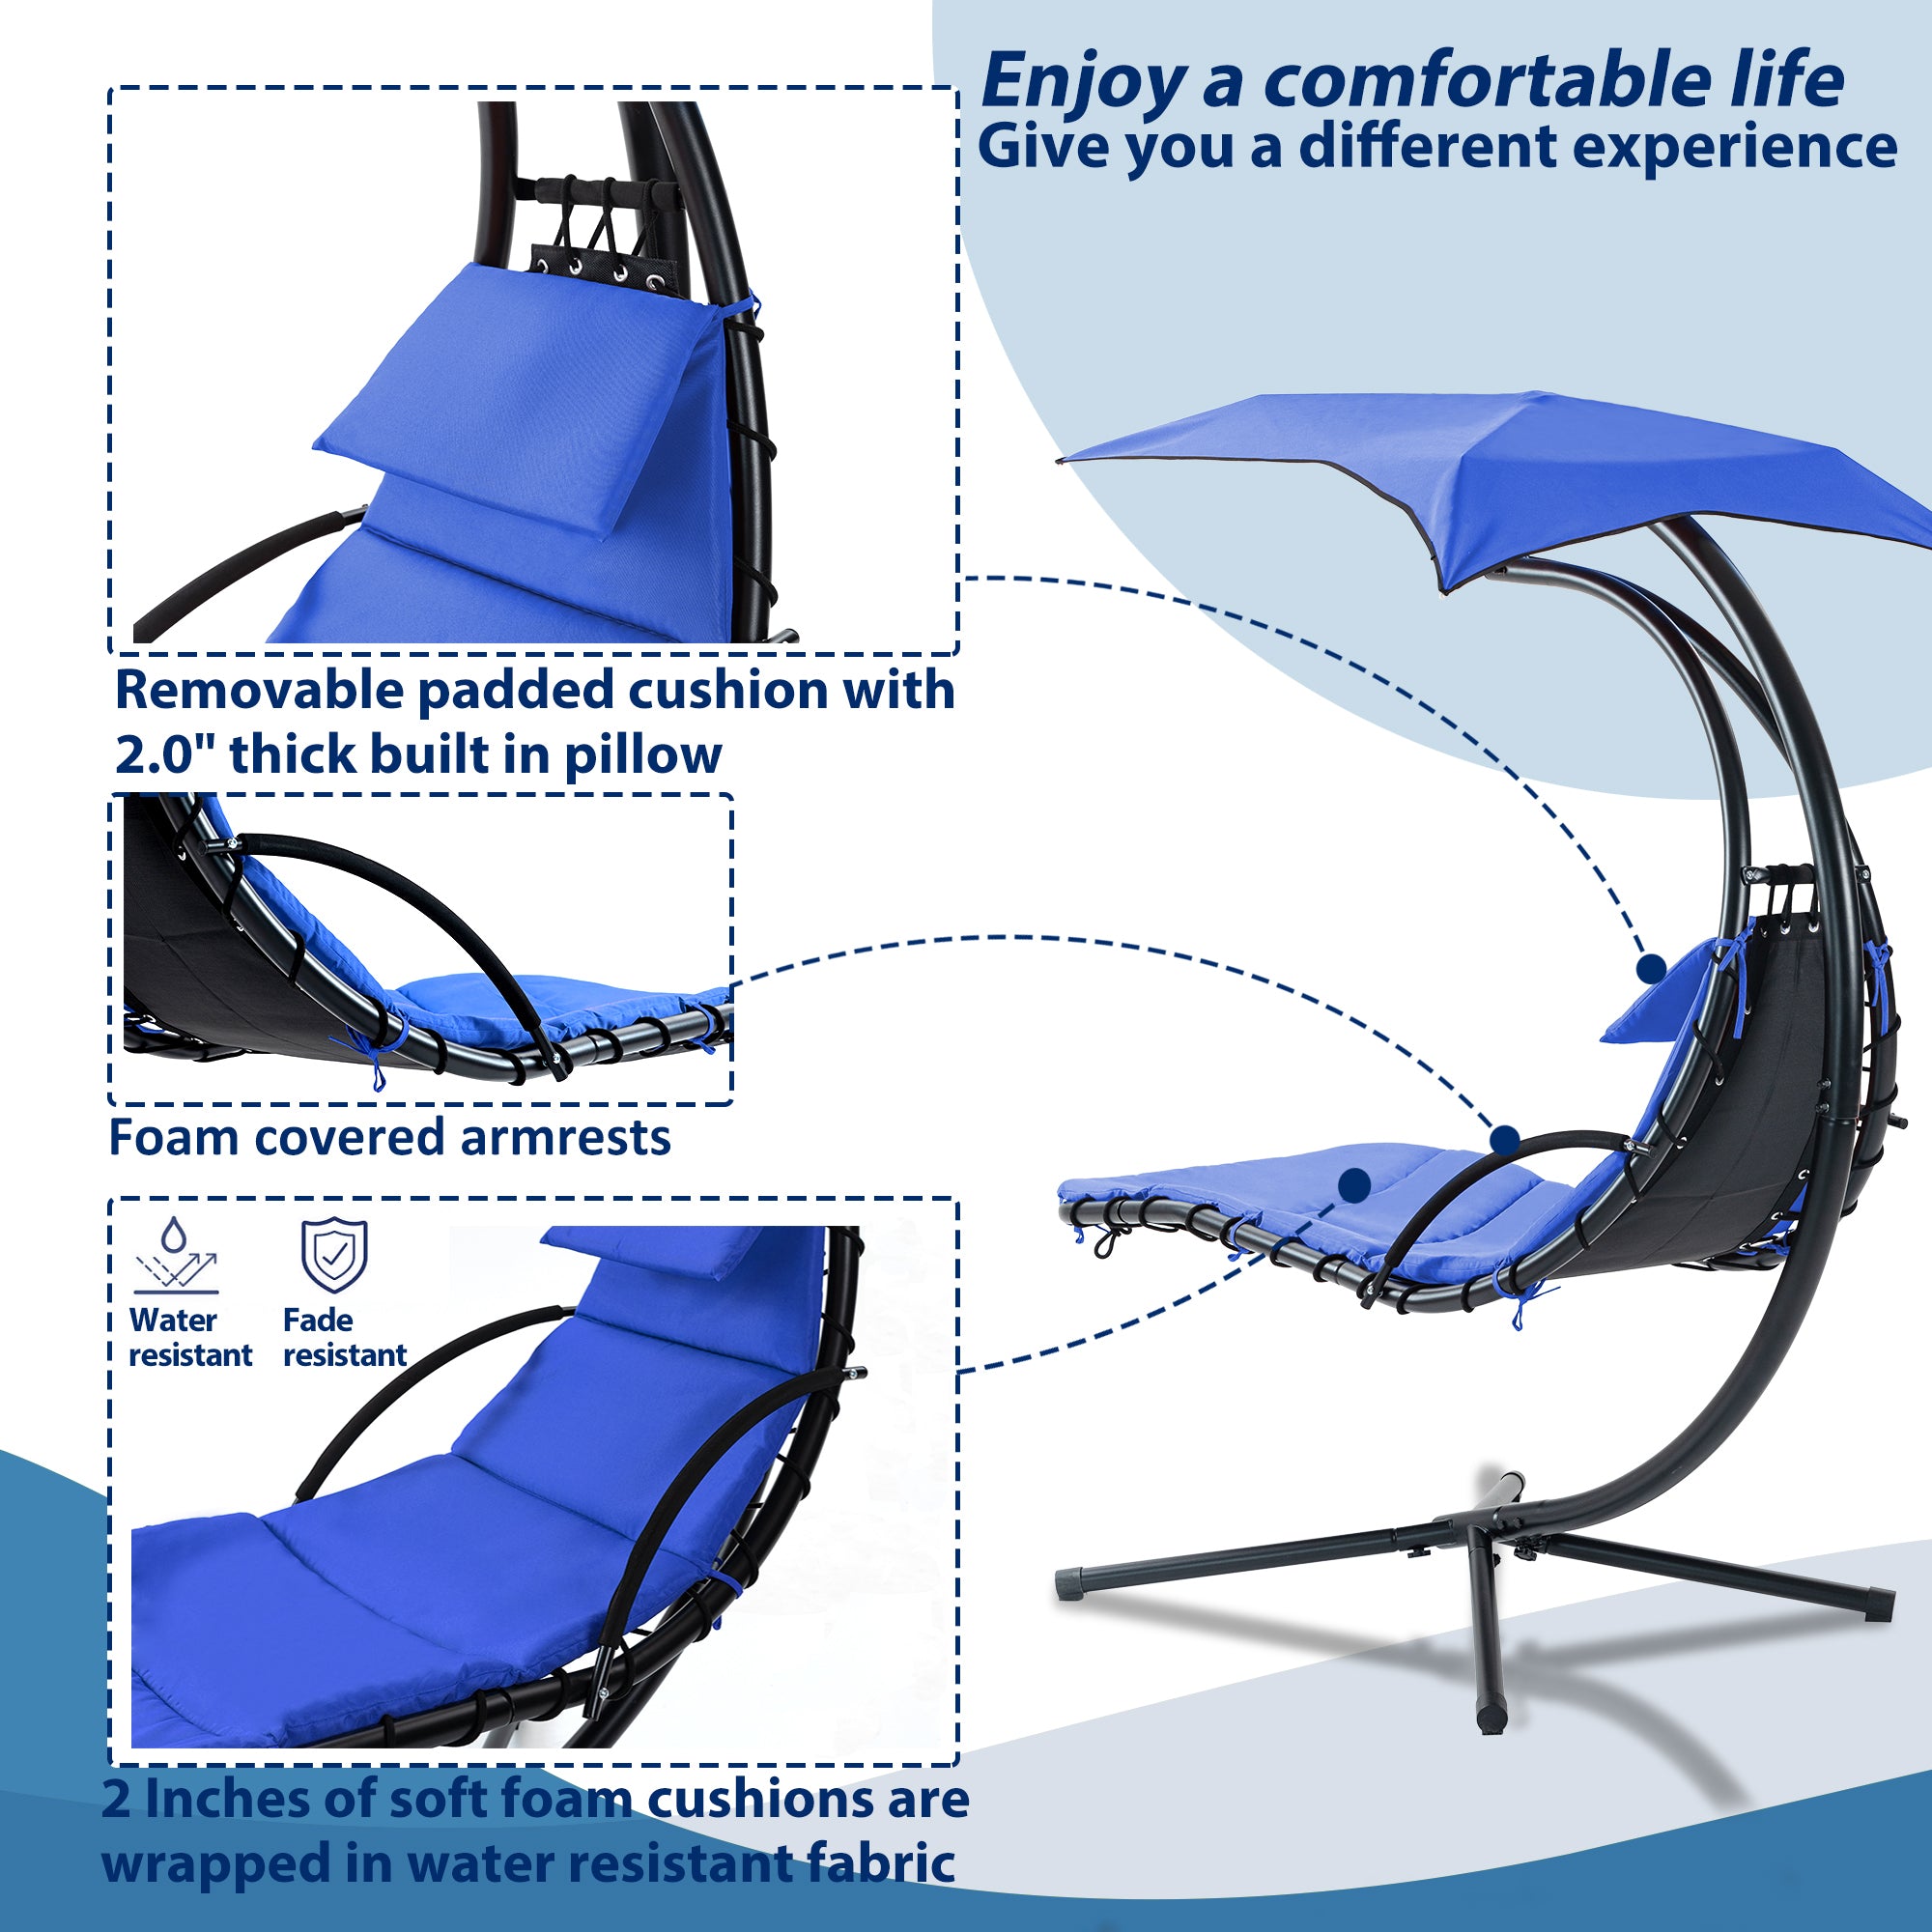 Hanging Chaise Lounger with Removable Canopy, Outdoor navy-metal